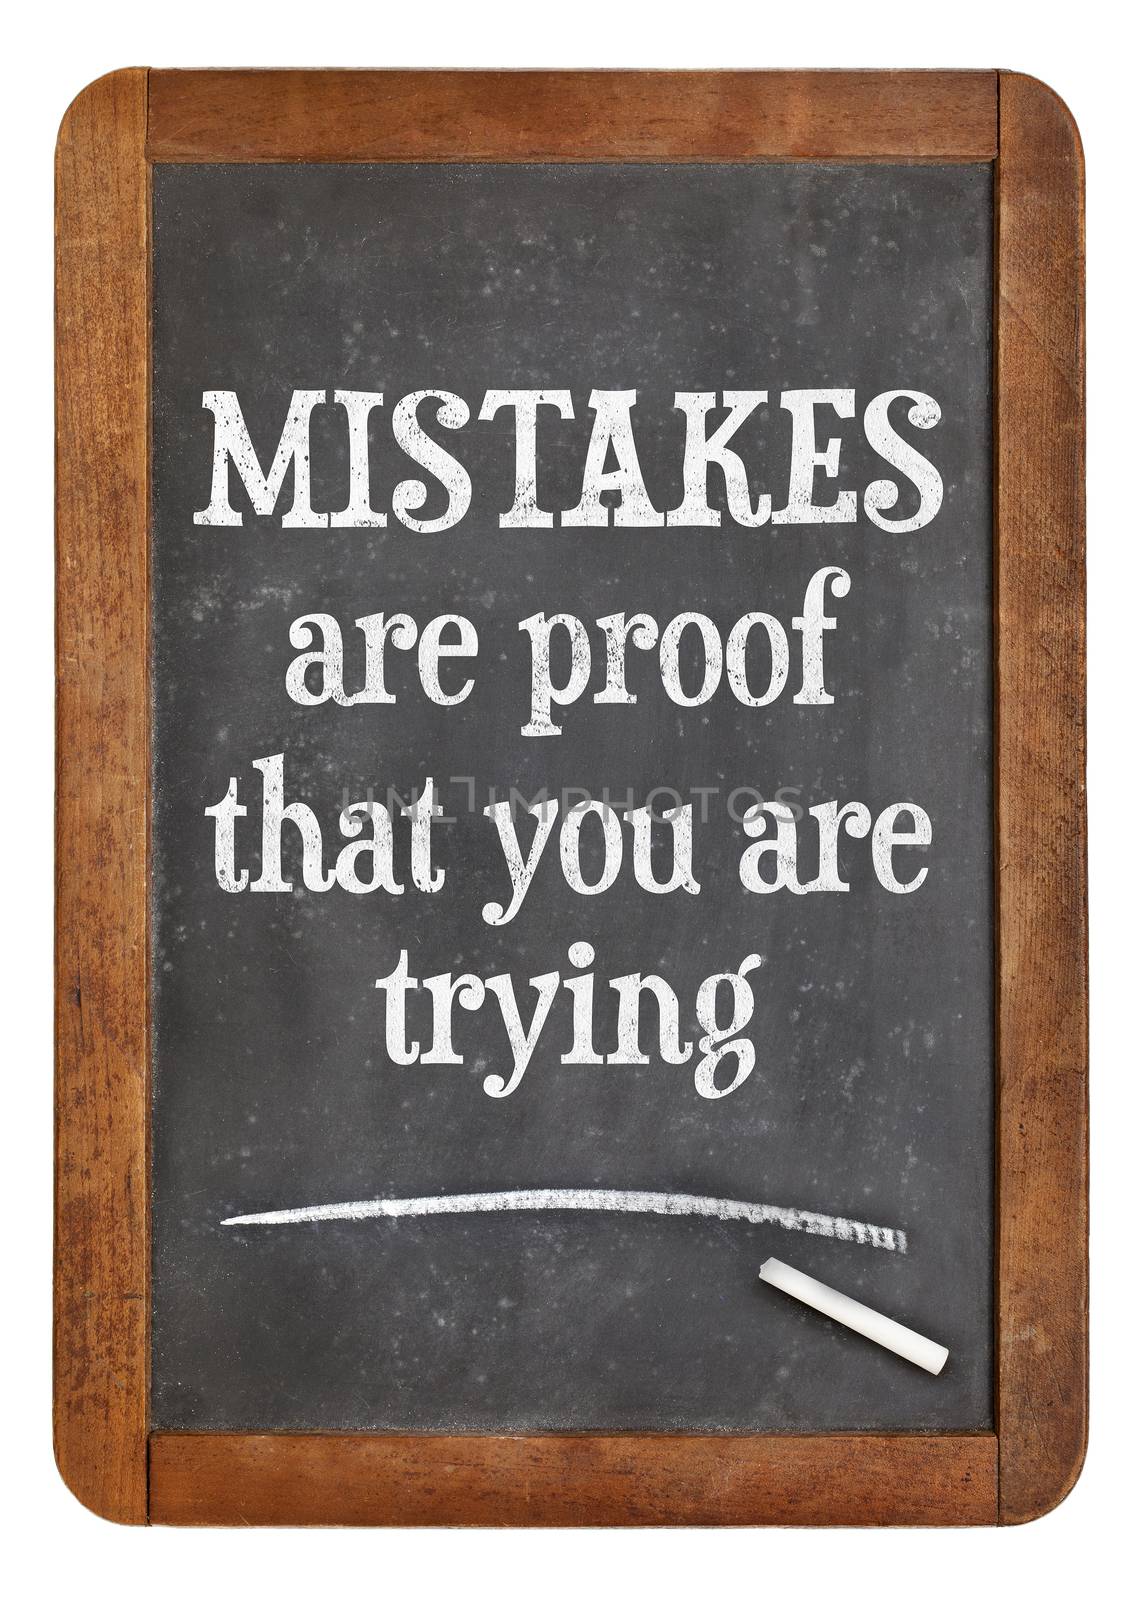 Mistakes are proof that you are trying by PixelsAway